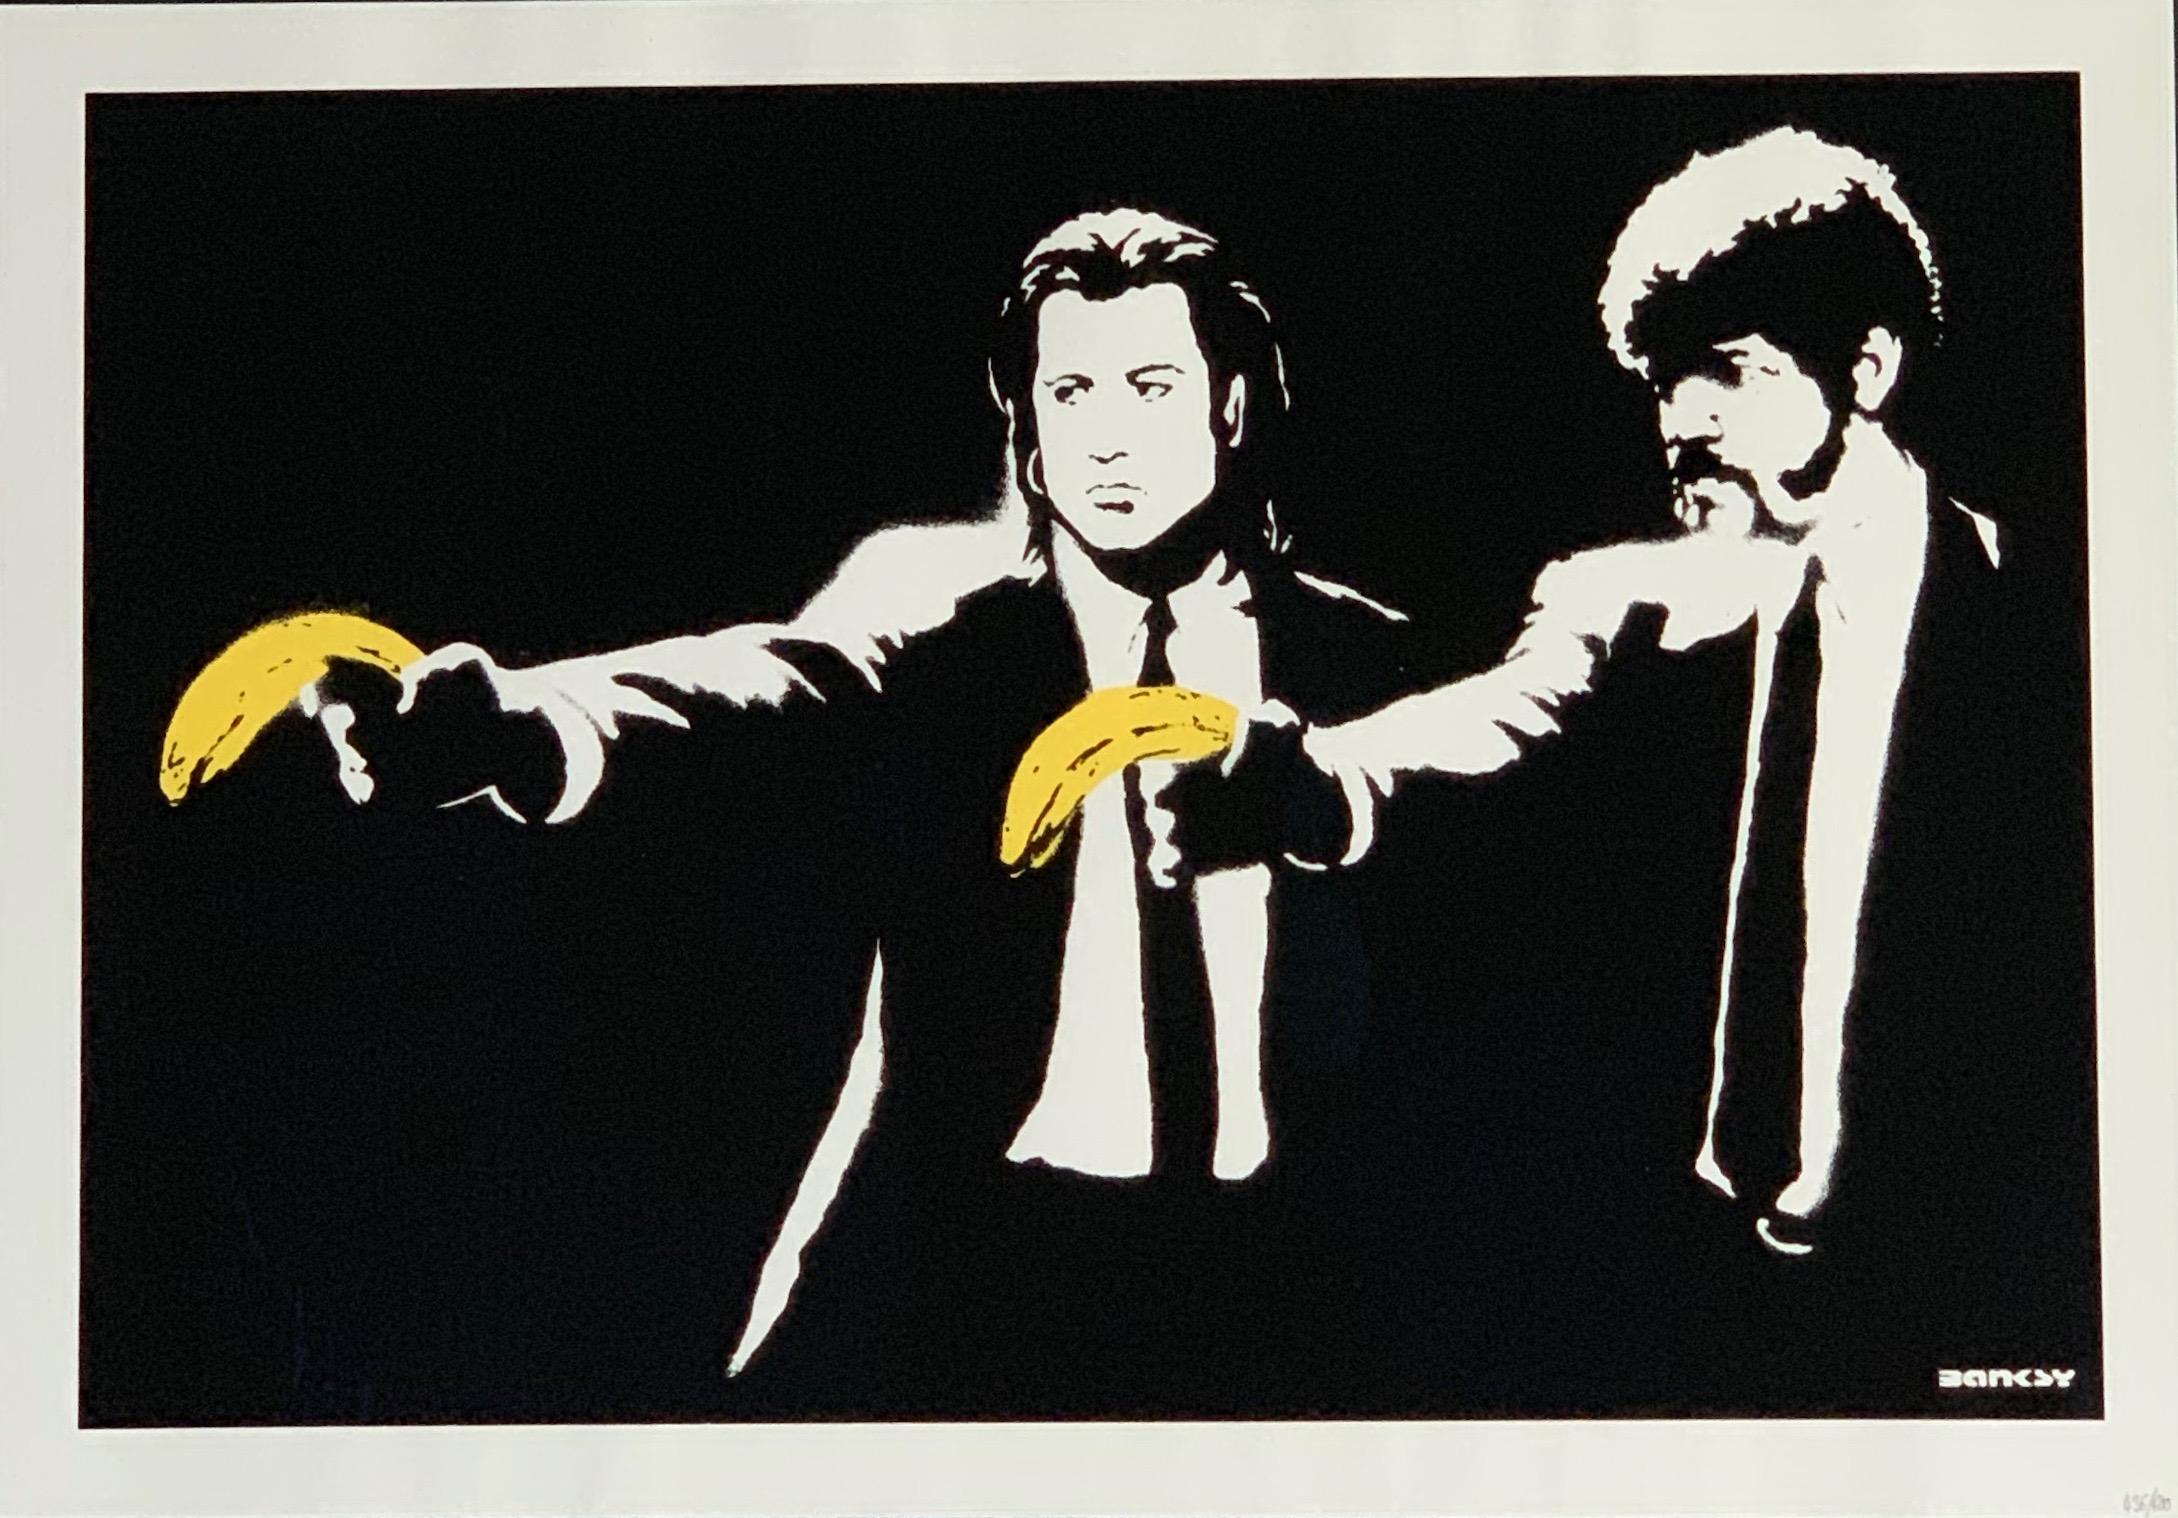 Pulp Fiction Banksy 2004 unsigned

Banksy’s Pulp Fiction art depicts a famous scene from the iconic Quentin Tarantino film in which two protagonists from Pulp Fiction are clutching bananas instead of guns.
This work first appeared in 2002 as a